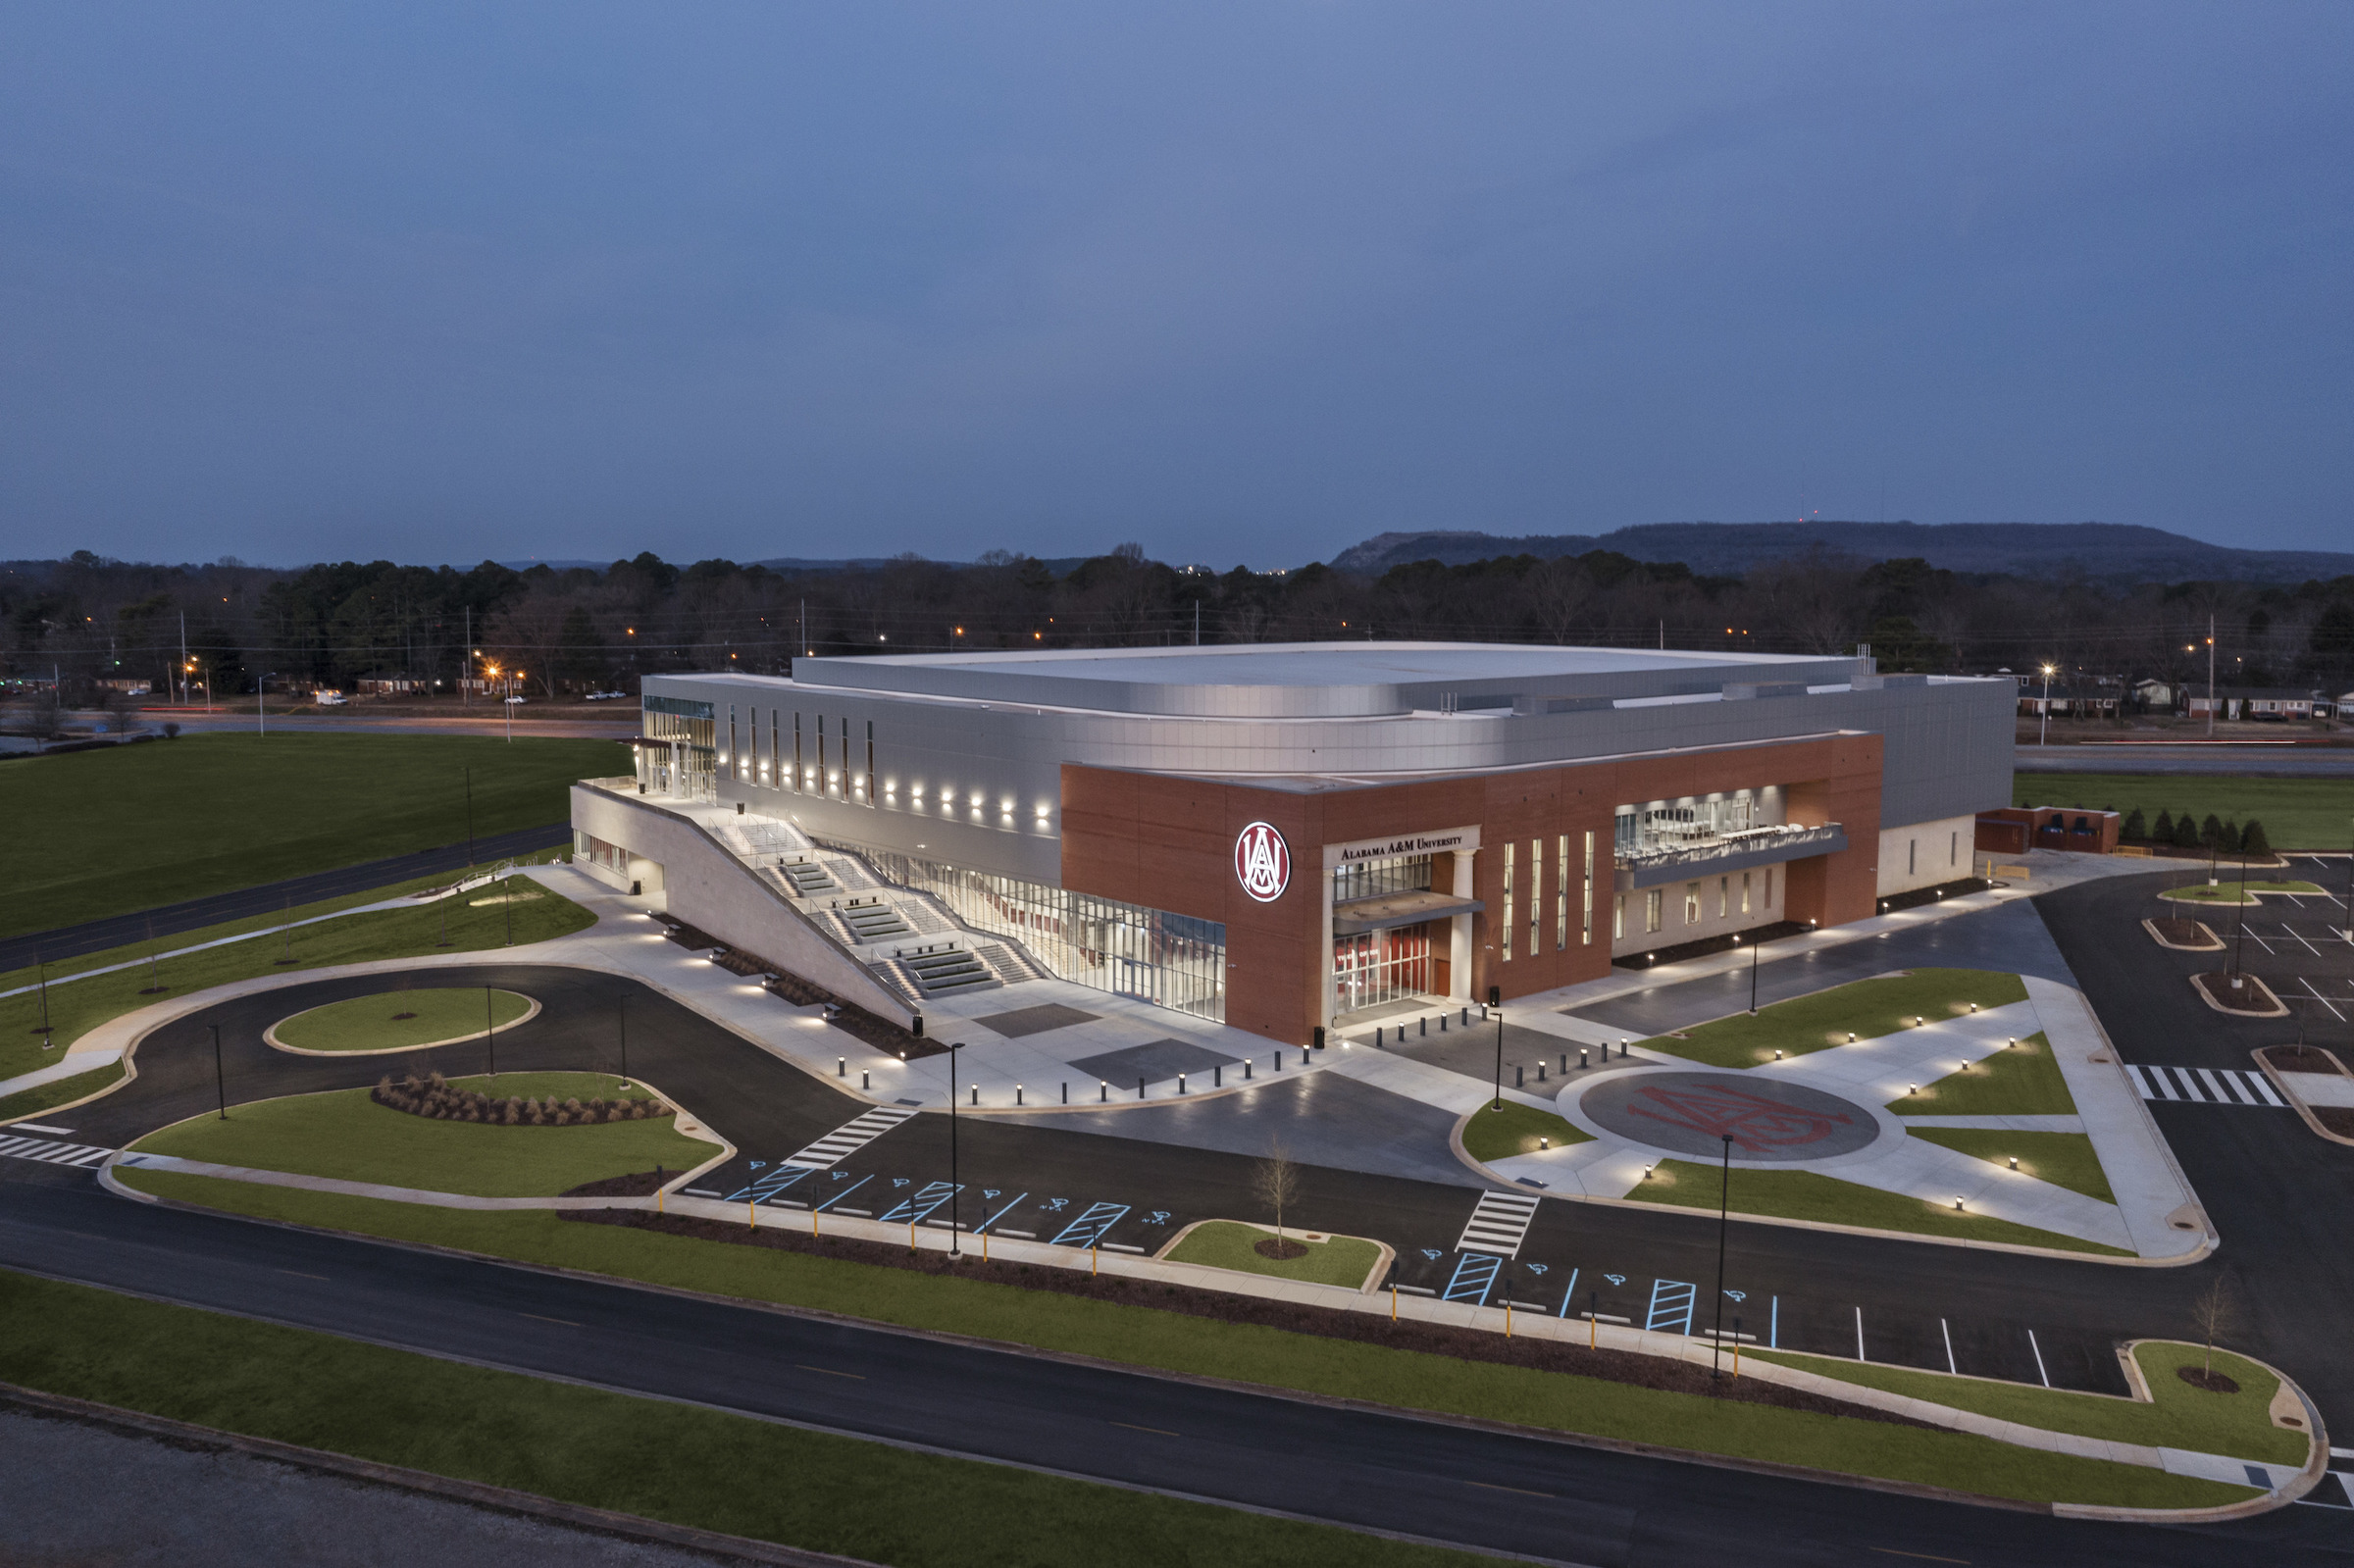 Top 130 Sports Facility Architecture Firms for 2023 photo The Alabama A&M University Event Center, designed by Moody Nolan,